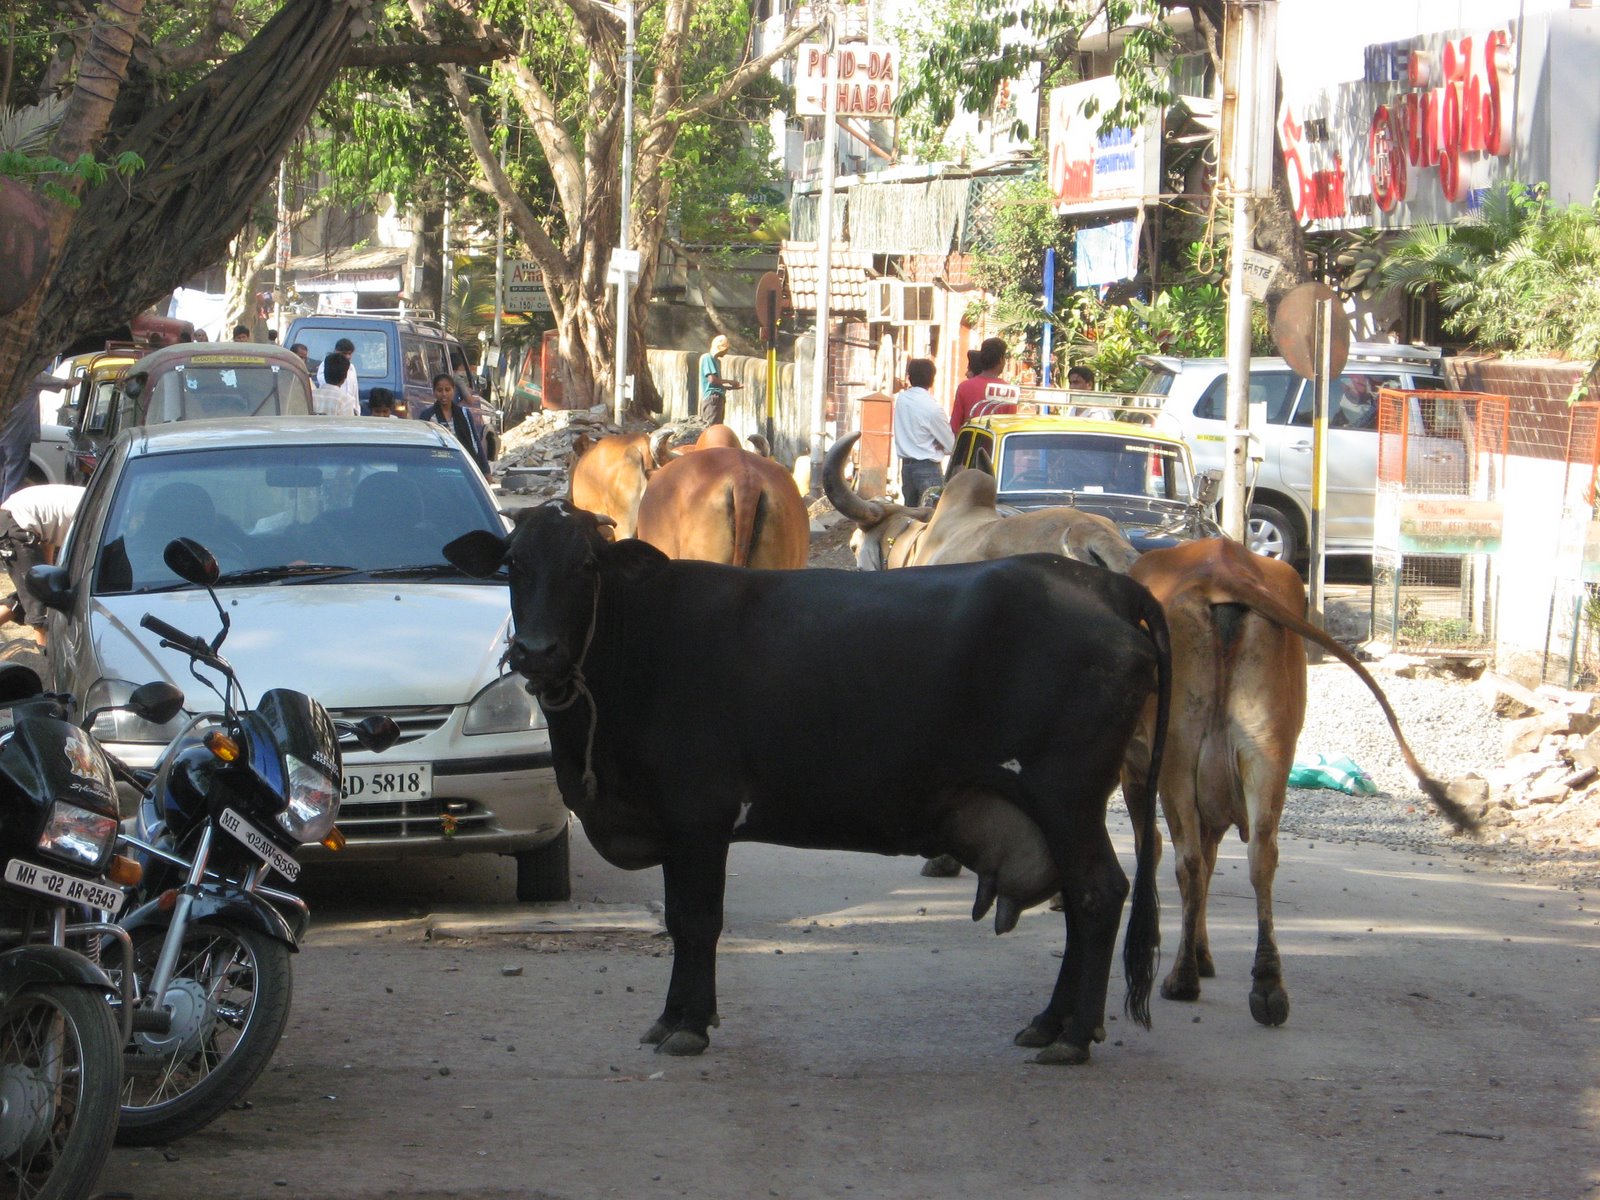 [Cows+in+the+middle+of+the+road.jpg]